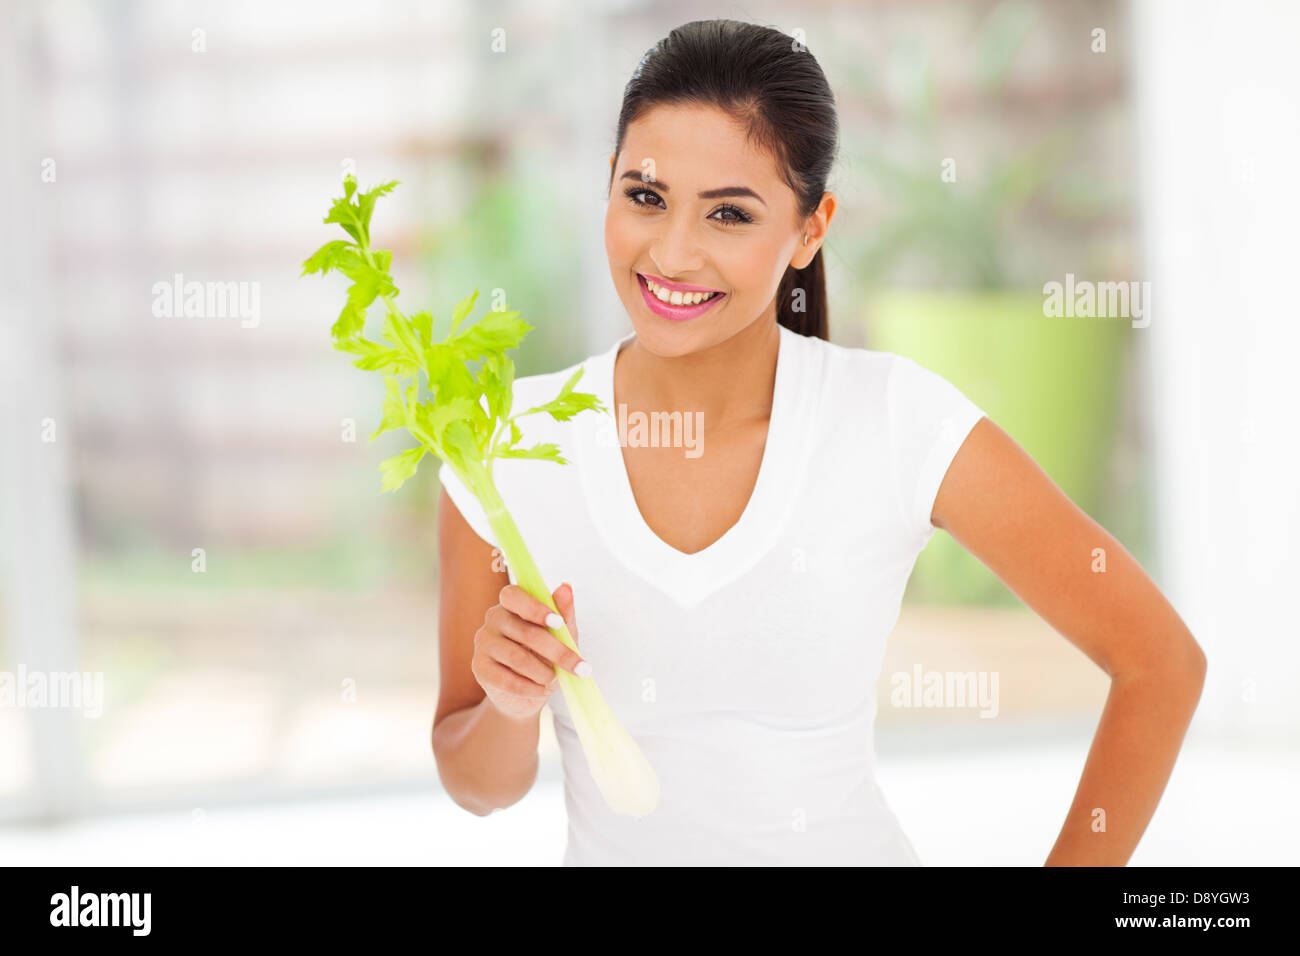 healthy young woman holding celery stick and smiling Stock Photo